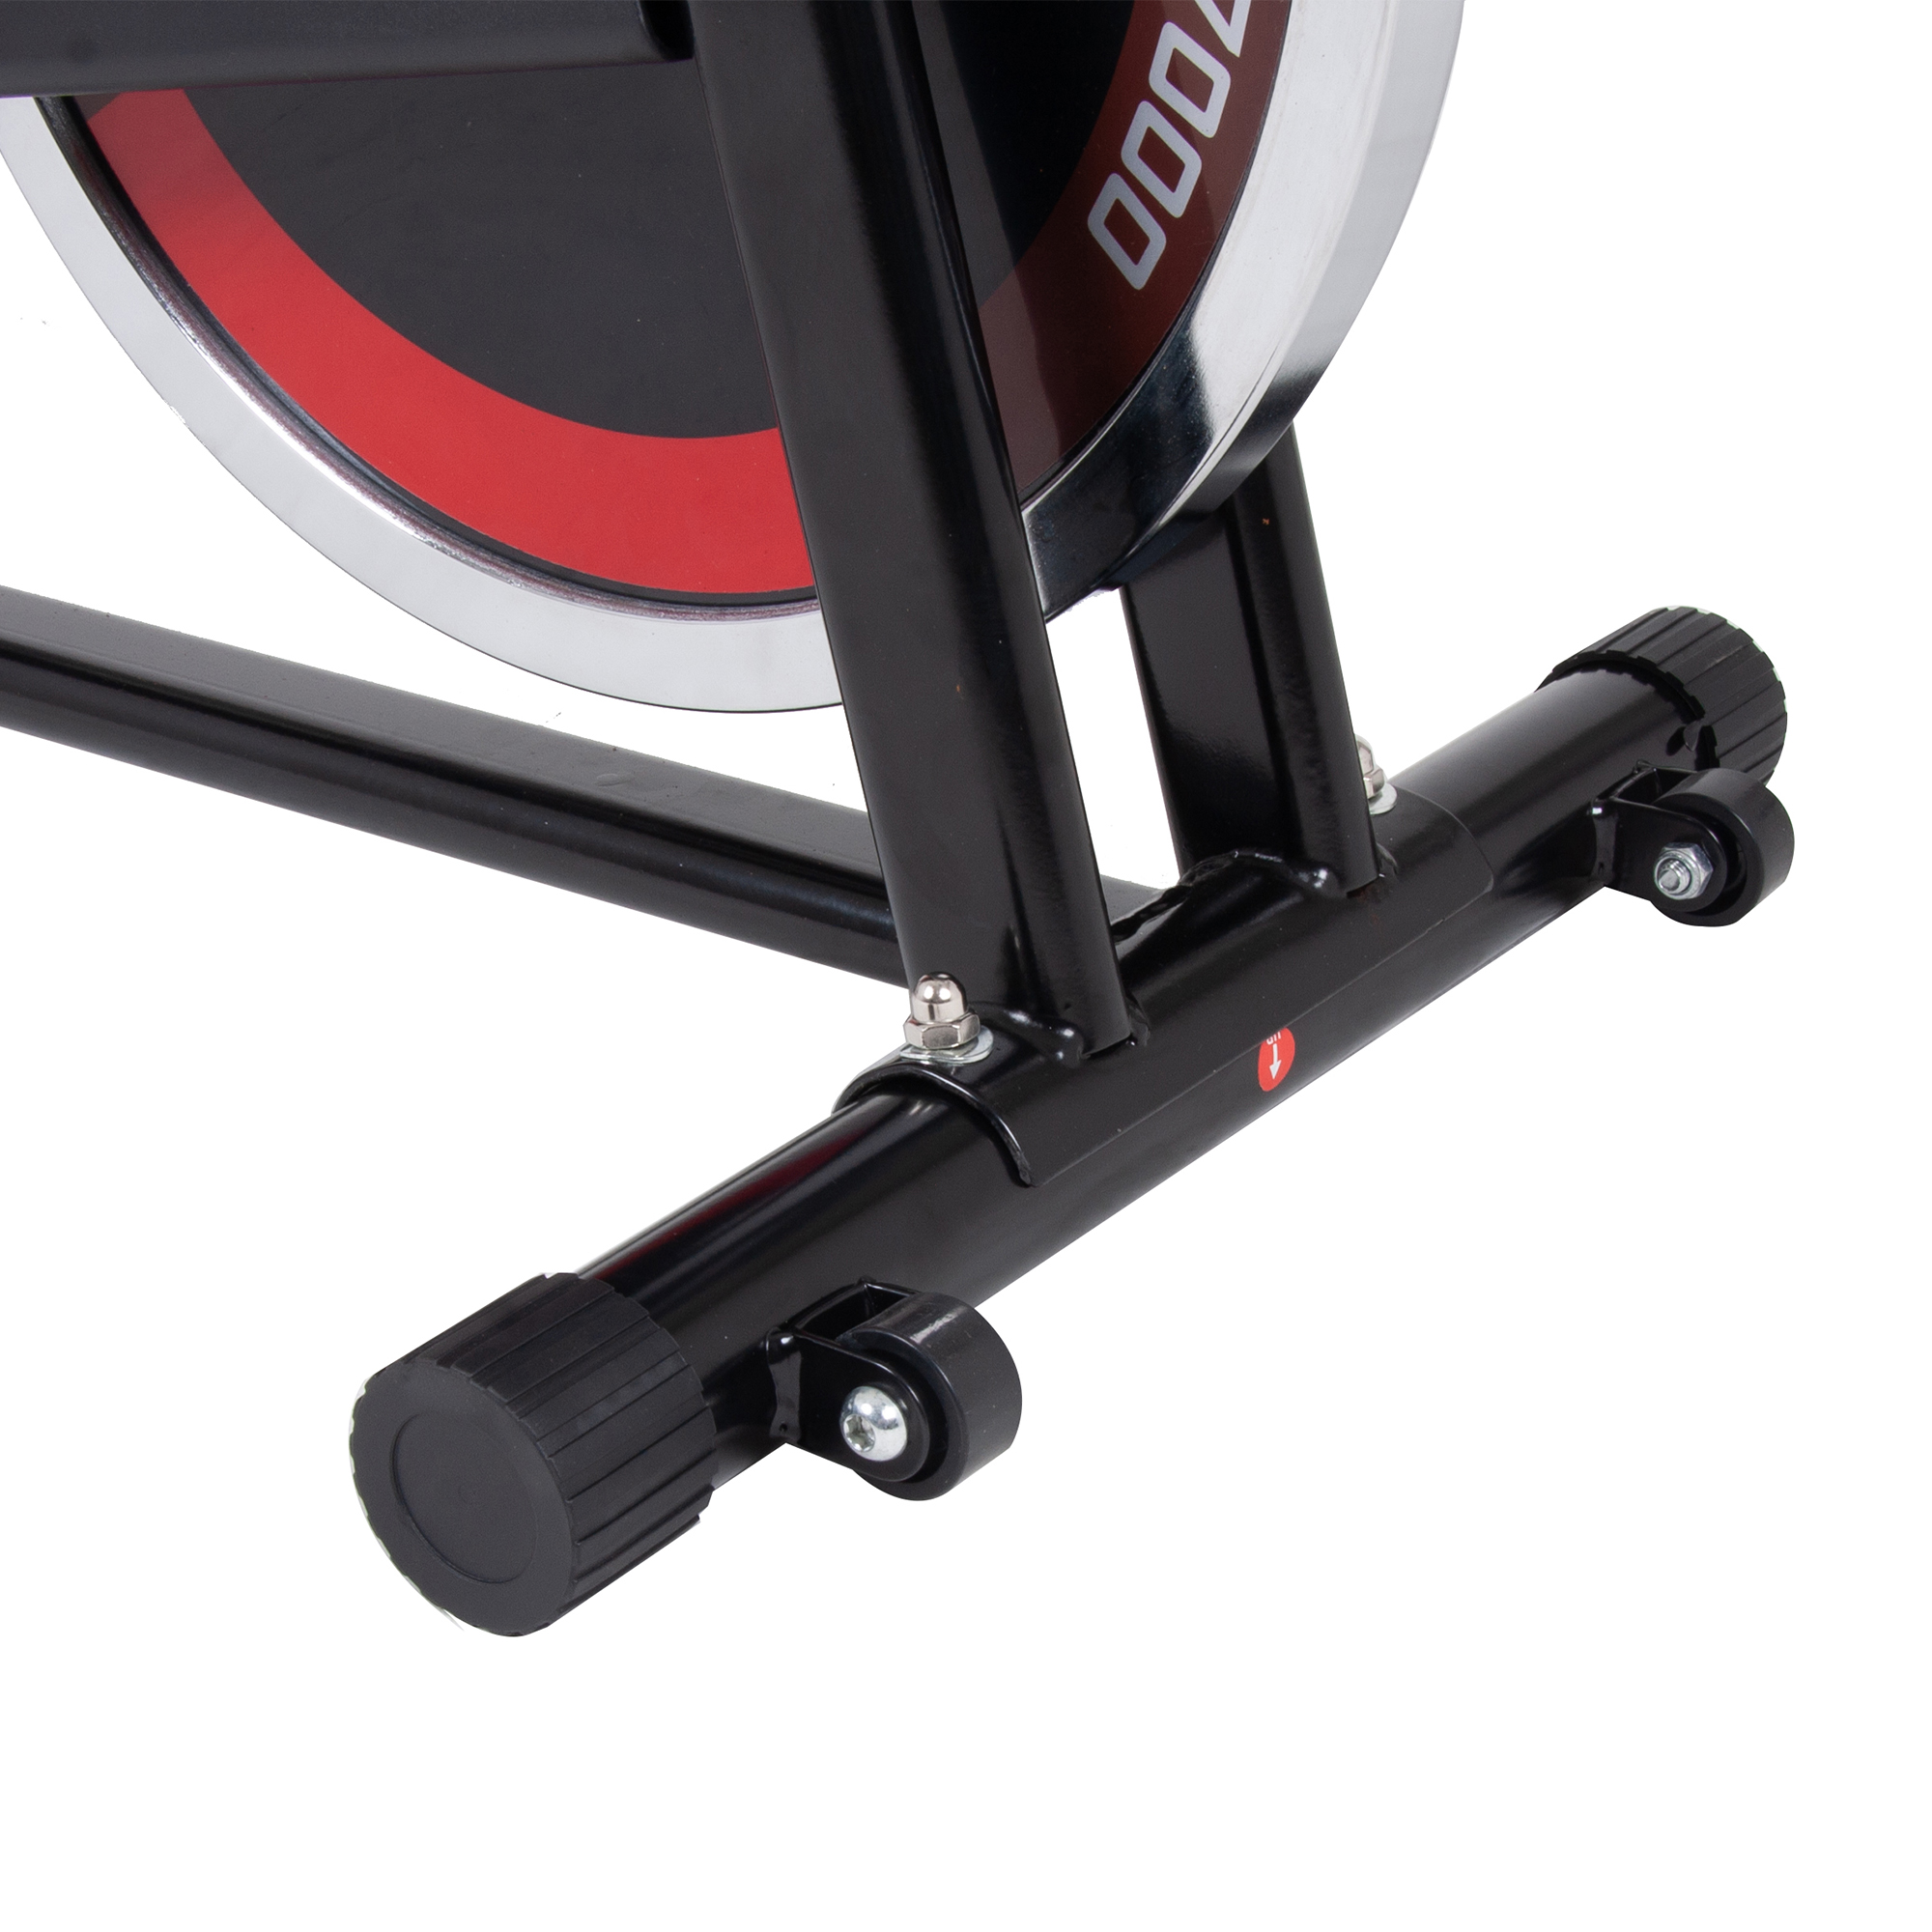 Body Rider ERG7000 PRO Cycling Trainer Stationary Bike, Max. Weight Capacity 250 Lbs. - image 4 of 7